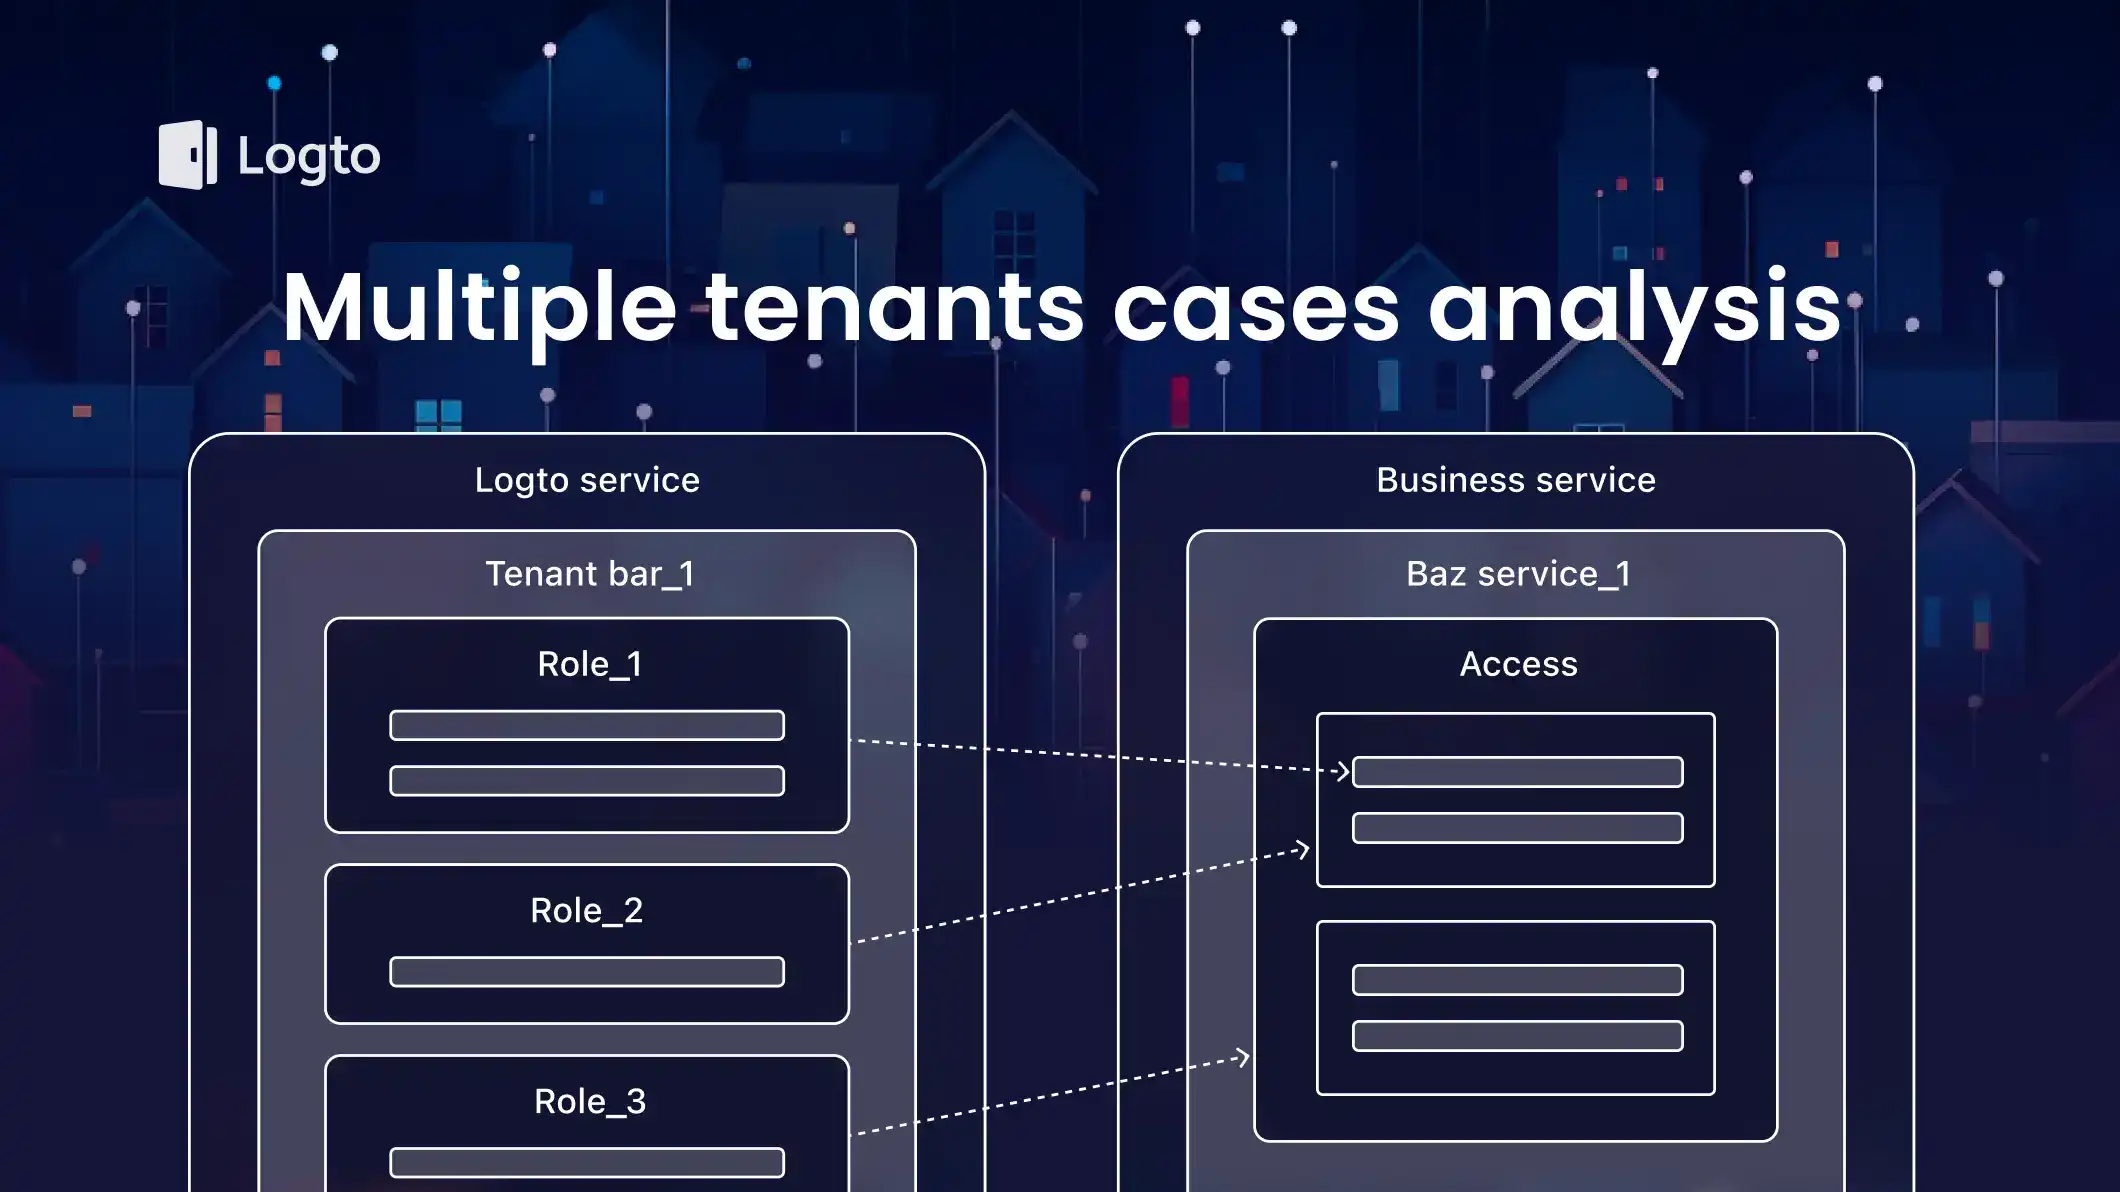 Do you really need multiple tenants to manage your identity system?